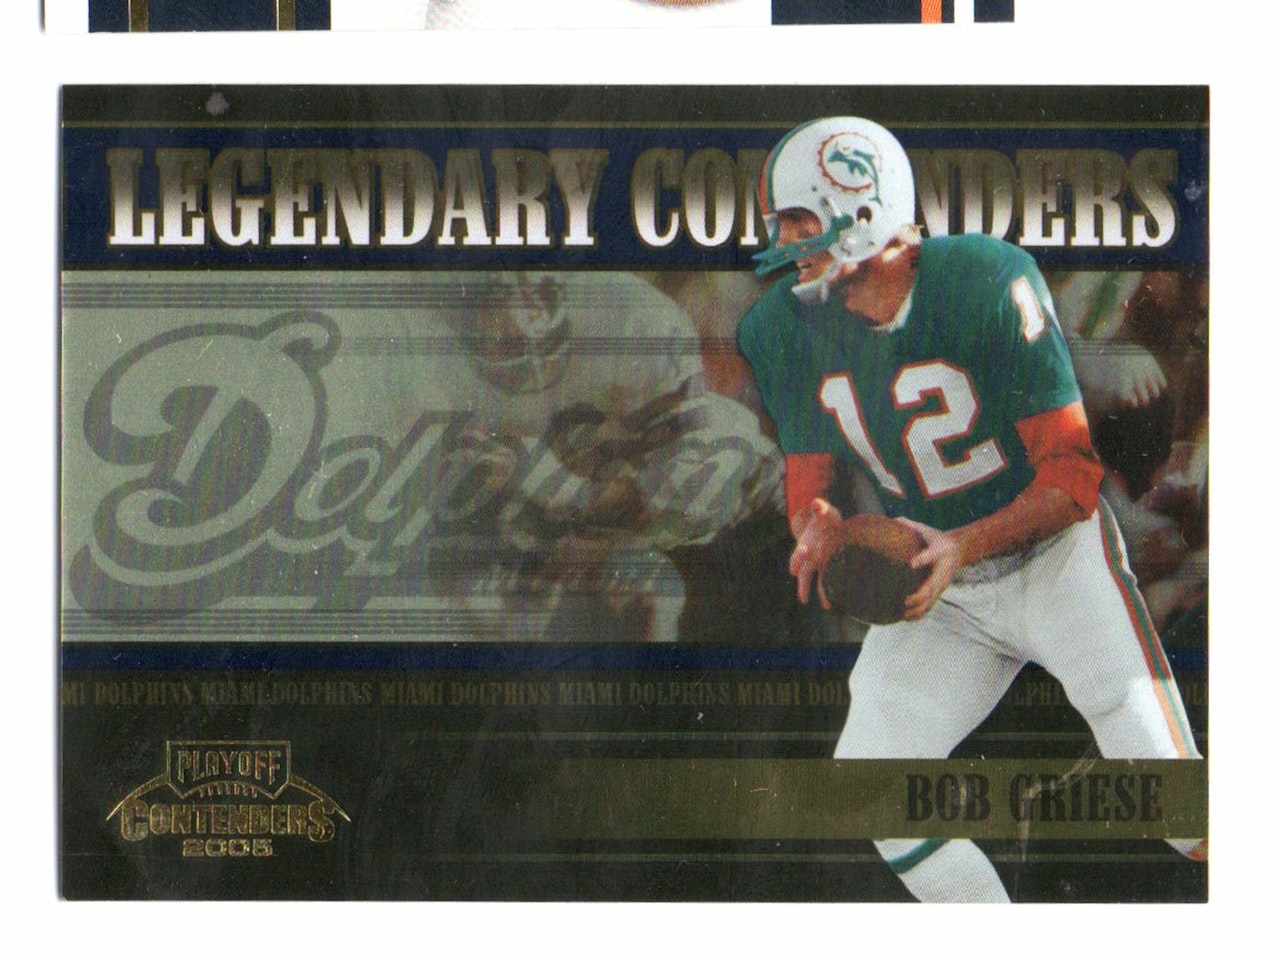 2005 Playoff Contenders Legendary Contenders Blue #2 Bob Griese (20-X300-NFLDOLPHINS)